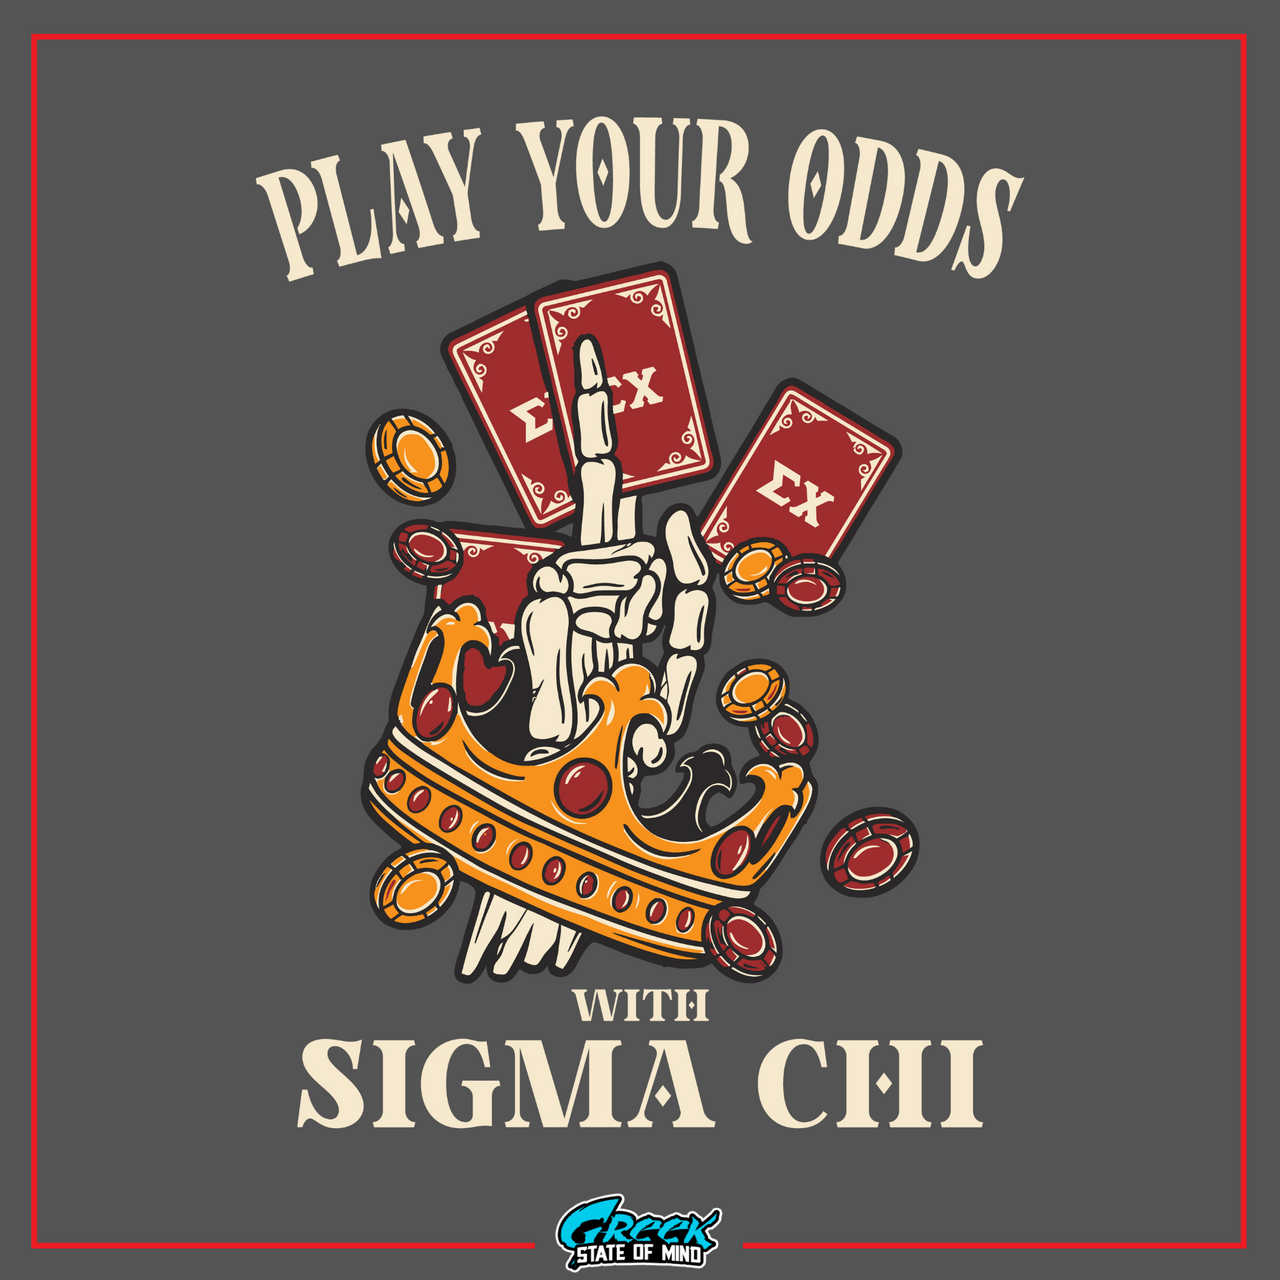 Sigma Chi Graphic Hoodie | Play Your Odds | Sigma Chi Fraternity Merch House design